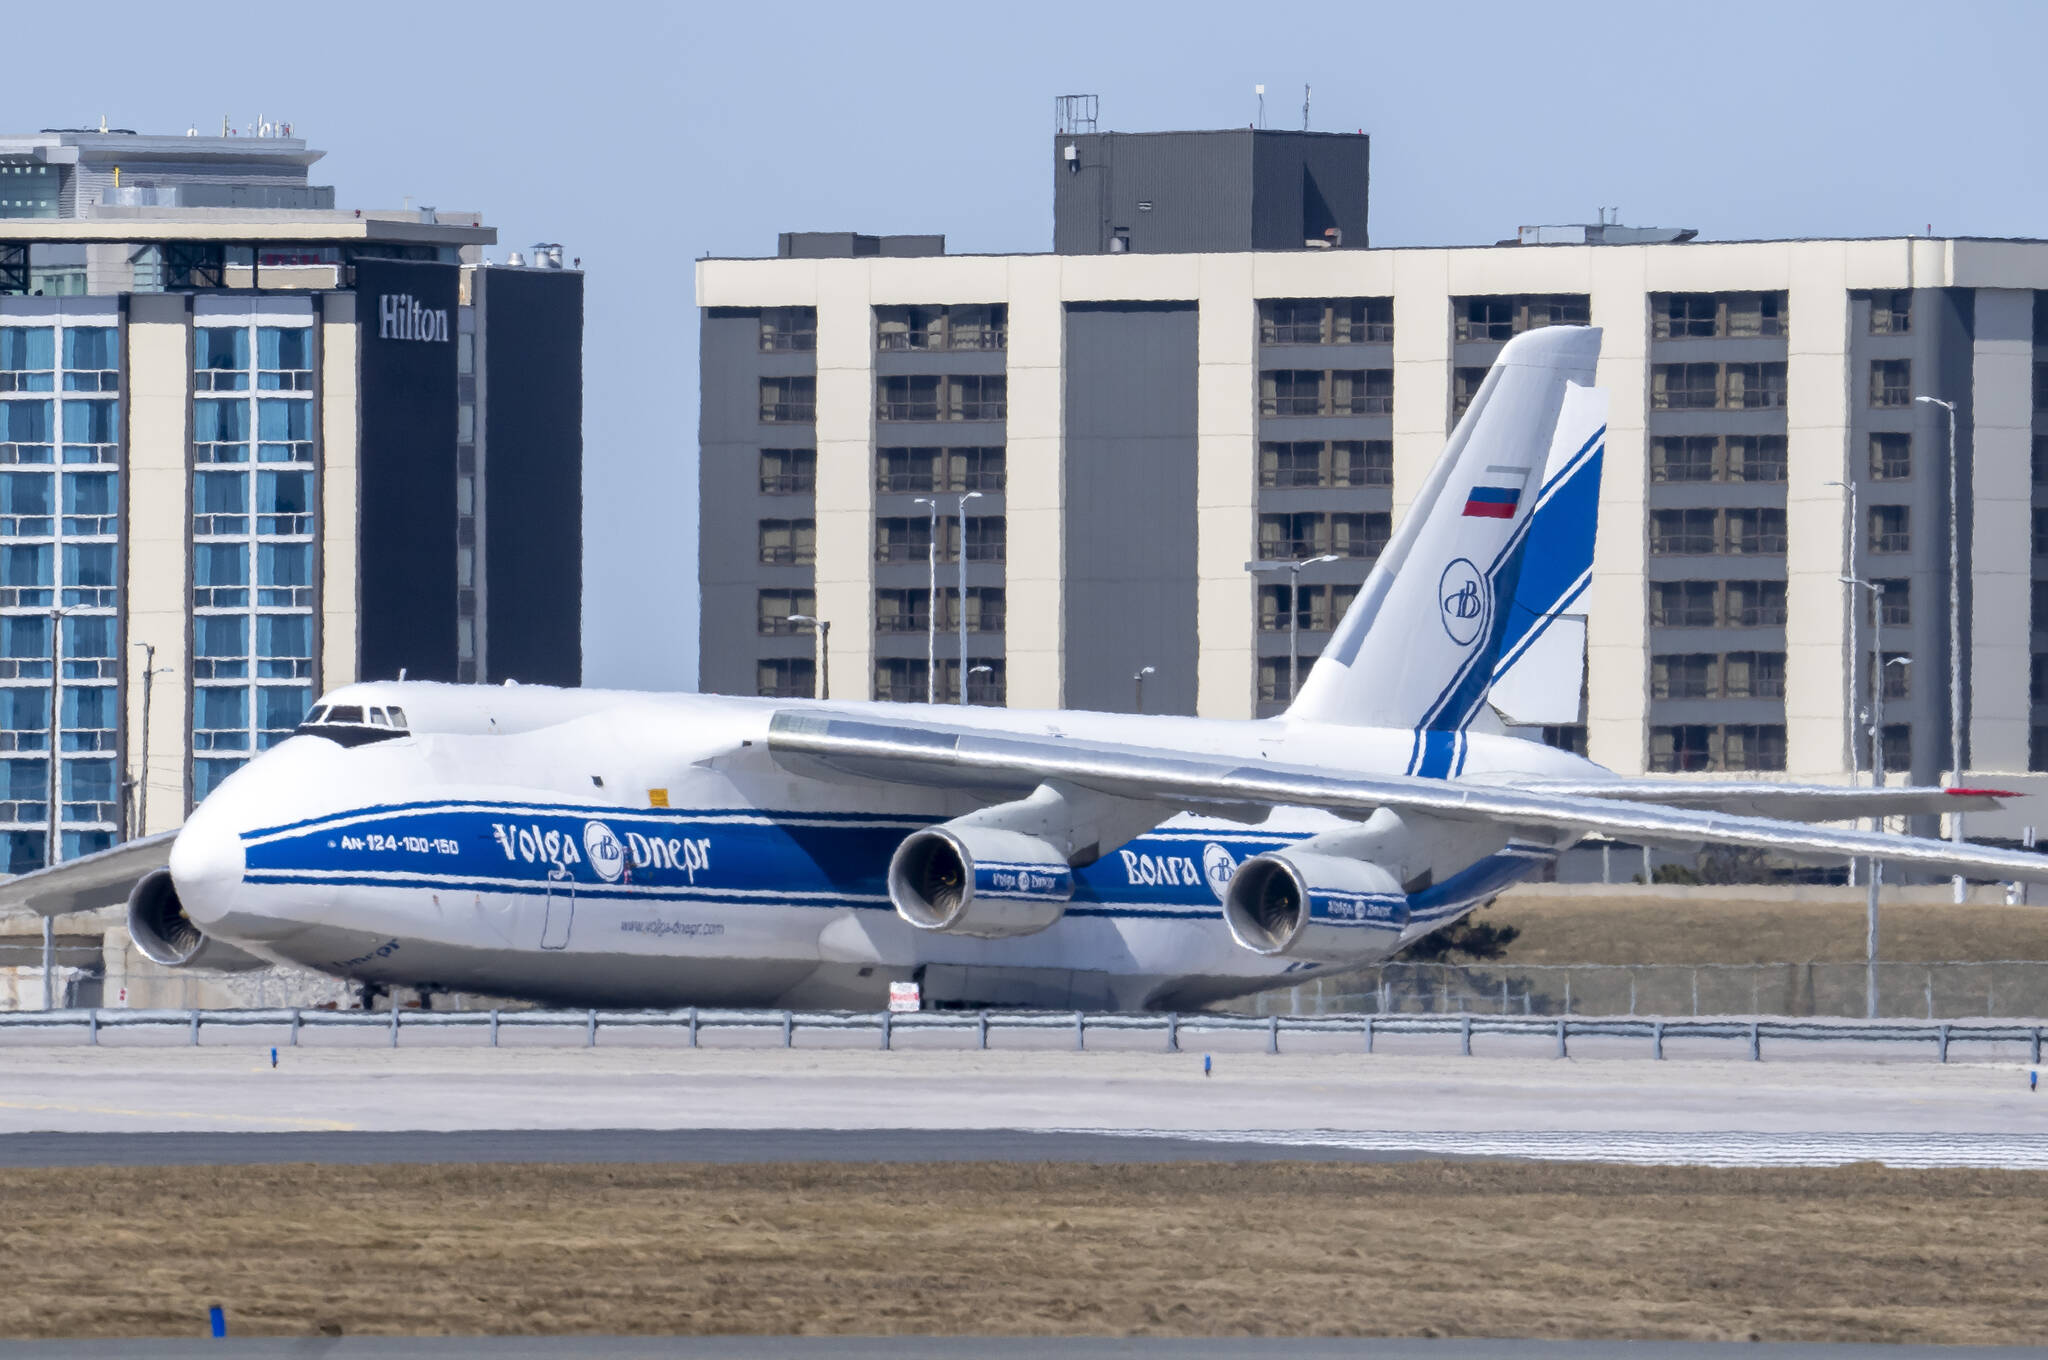 A Russian-registered Antonov AN-124 owned by Volga-Dneper sits on the tarmac at Pearson Airport in Toronto on Monday, March 21, 2022. Canada’s airspace is closed to Russian-registered aircraft and Volga-Dneper has suspended most of its operations worldwide because of sanctions. THE CANADIAN PRESS/Frank Gunn